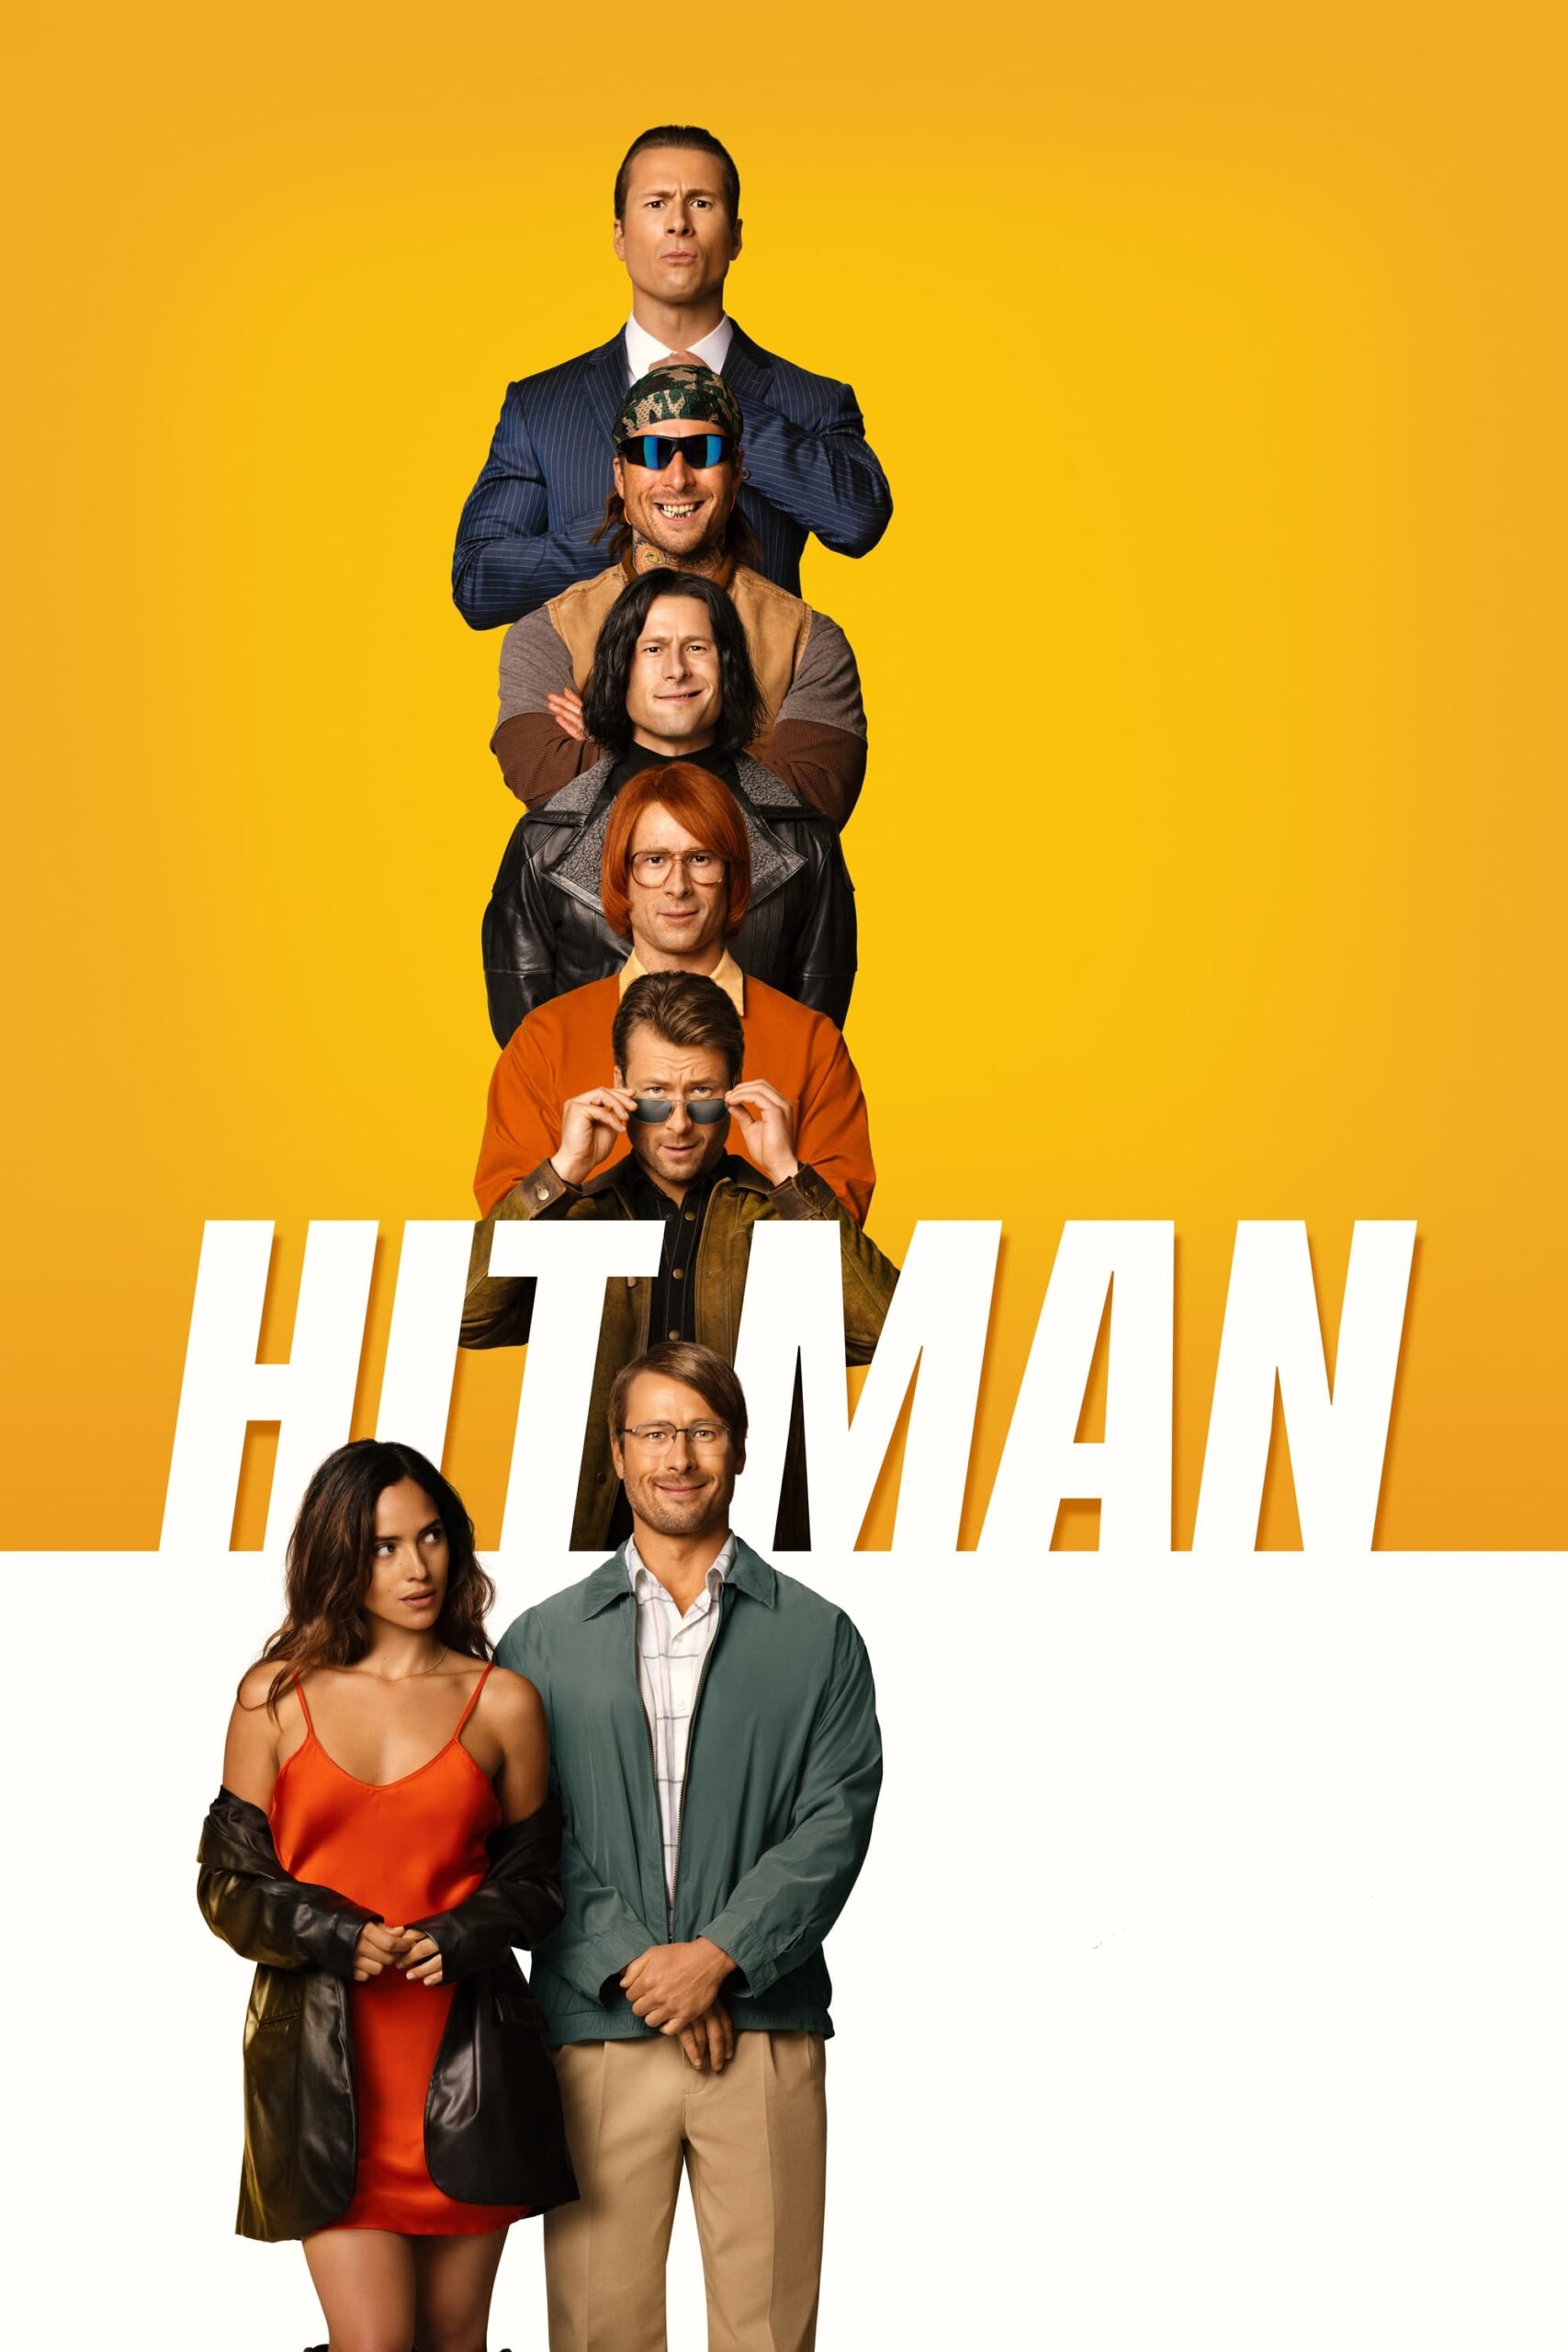 Poster for the movie "Hit Man"